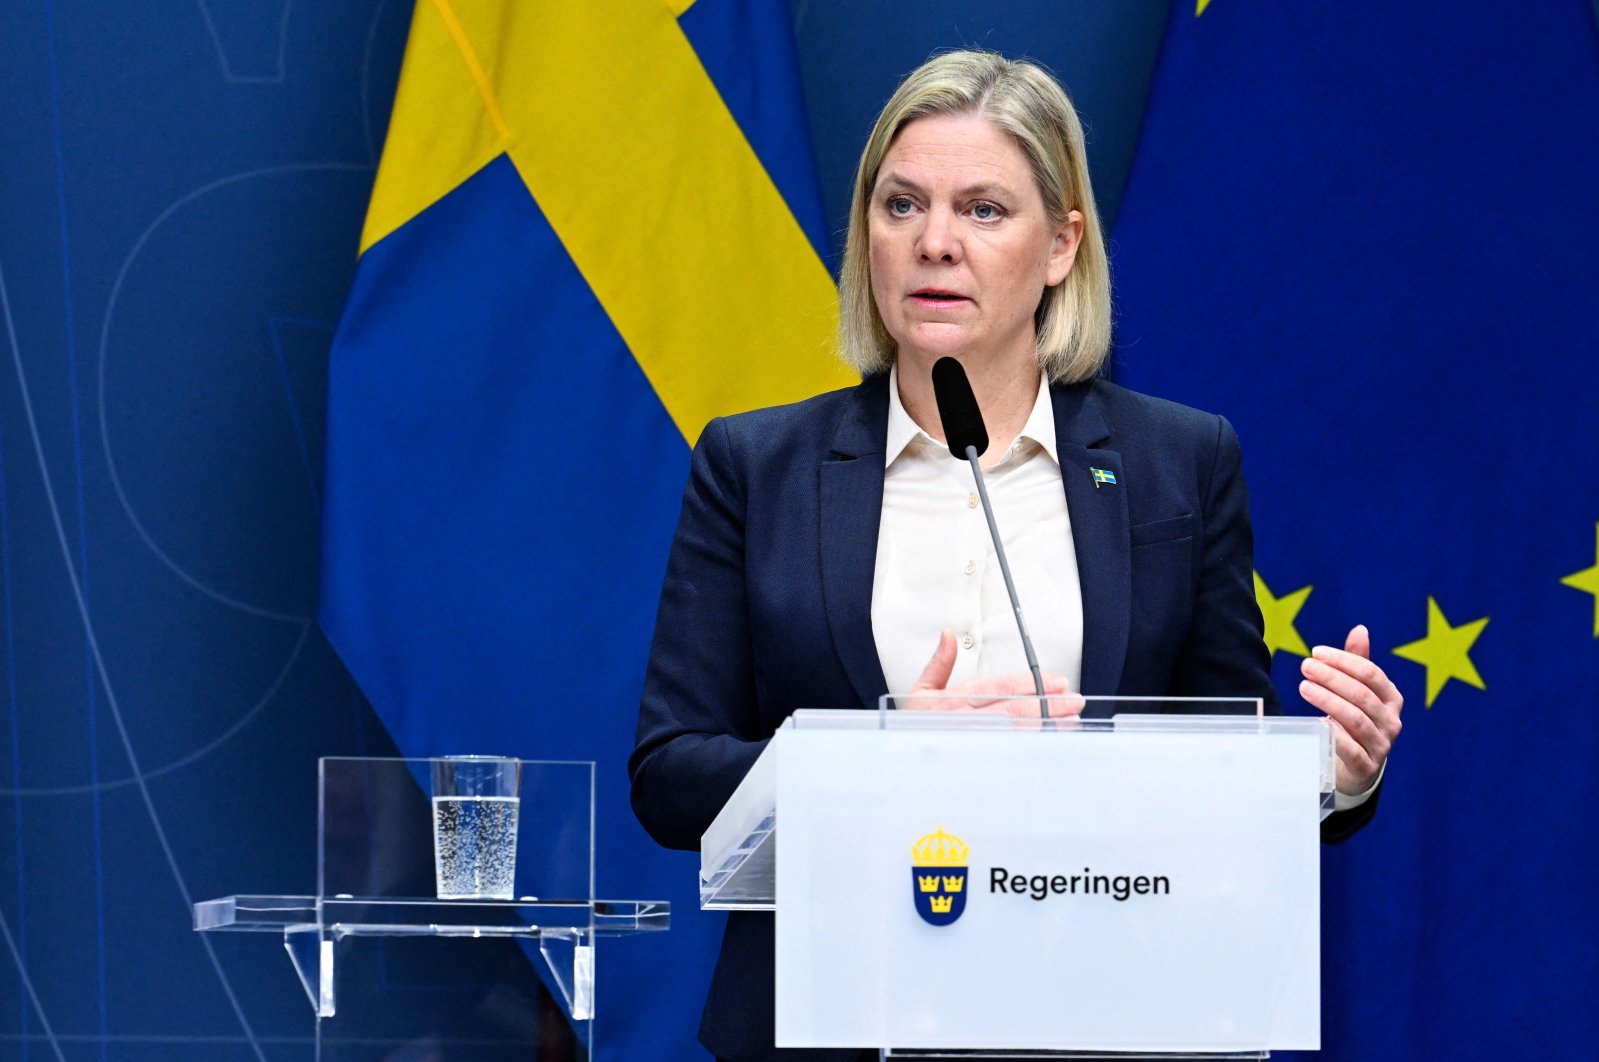 Sweden to send military aid to Ukraine in break with tradition | Daily ...